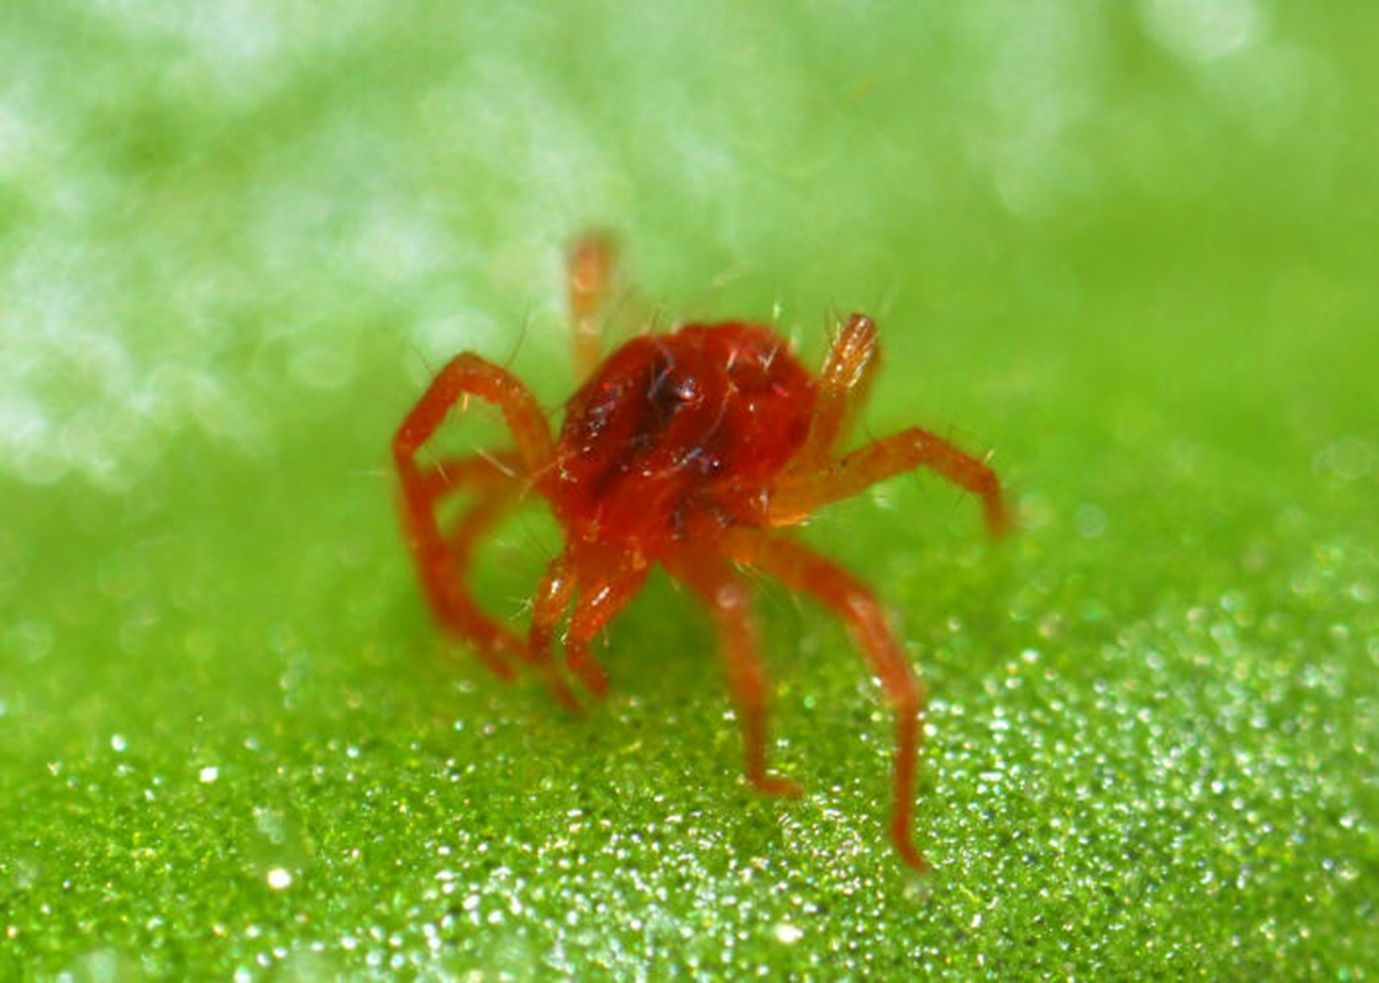 Tetranychus urticae (spider mite). Spider mites spin webs and feed on the undersides of leaves, perforating plant cells and sucking the cell contents.